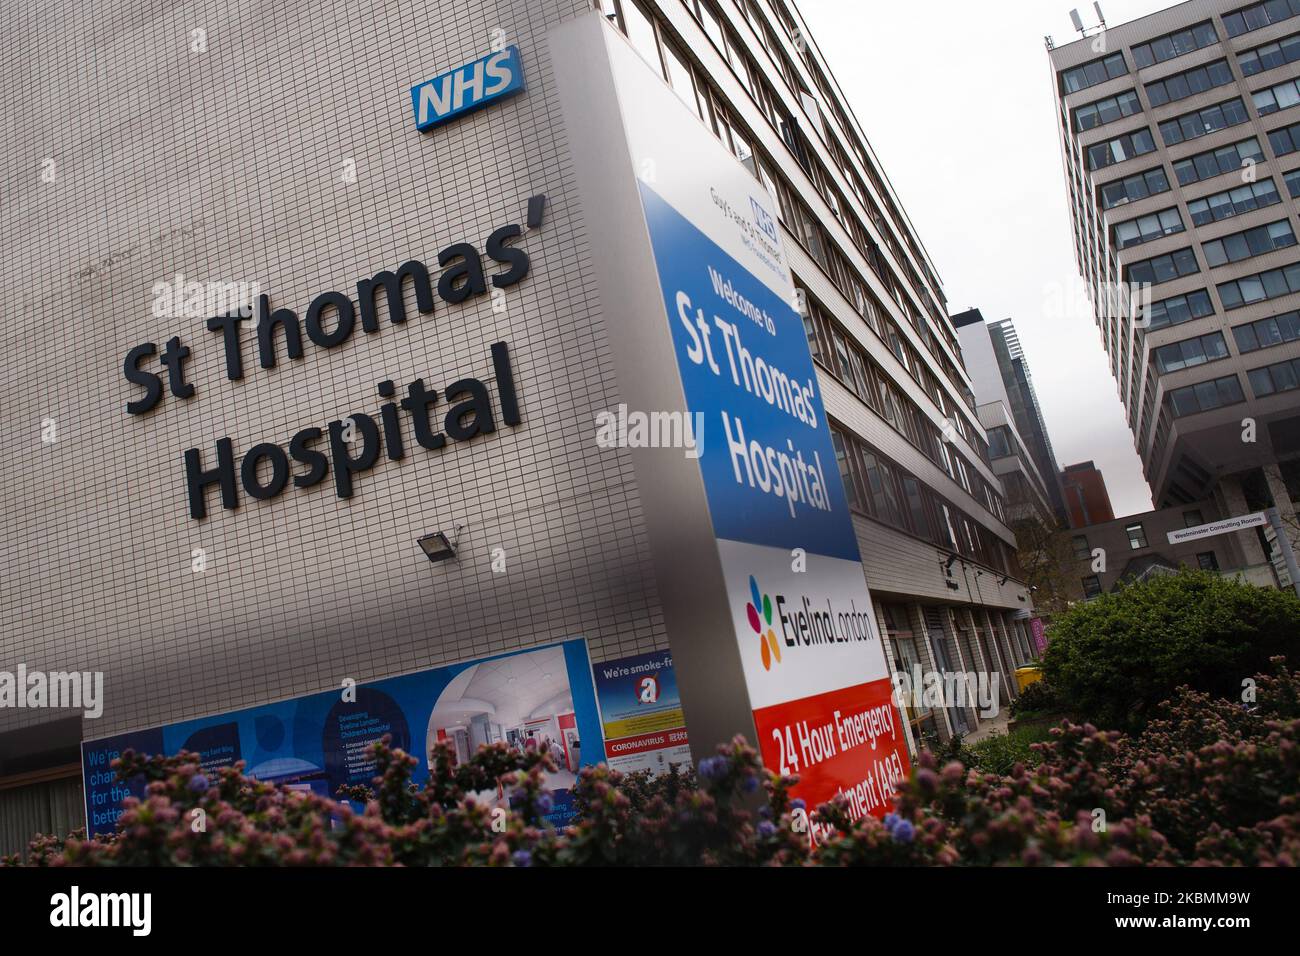 St Thomas' Hospital, where British Prime Minister Boris Johnson remains in intensive care with the covid-19 coronavirus, stands beside the River Thames in London, England, on April 8, 2020. Johnson, 55, was admitted to the hospital on Sunday evening with what were described as 'persistent symptoms' of the novel coronavirus. He was moved to intensive care on Monday night after his condition was said to have 'worsened'. Chancellor of the Exchequer Rishi Sunak informed the country today, however, that the prime minister was now improving, sitting up and 'engaging positively' with the medical team Stock Photo